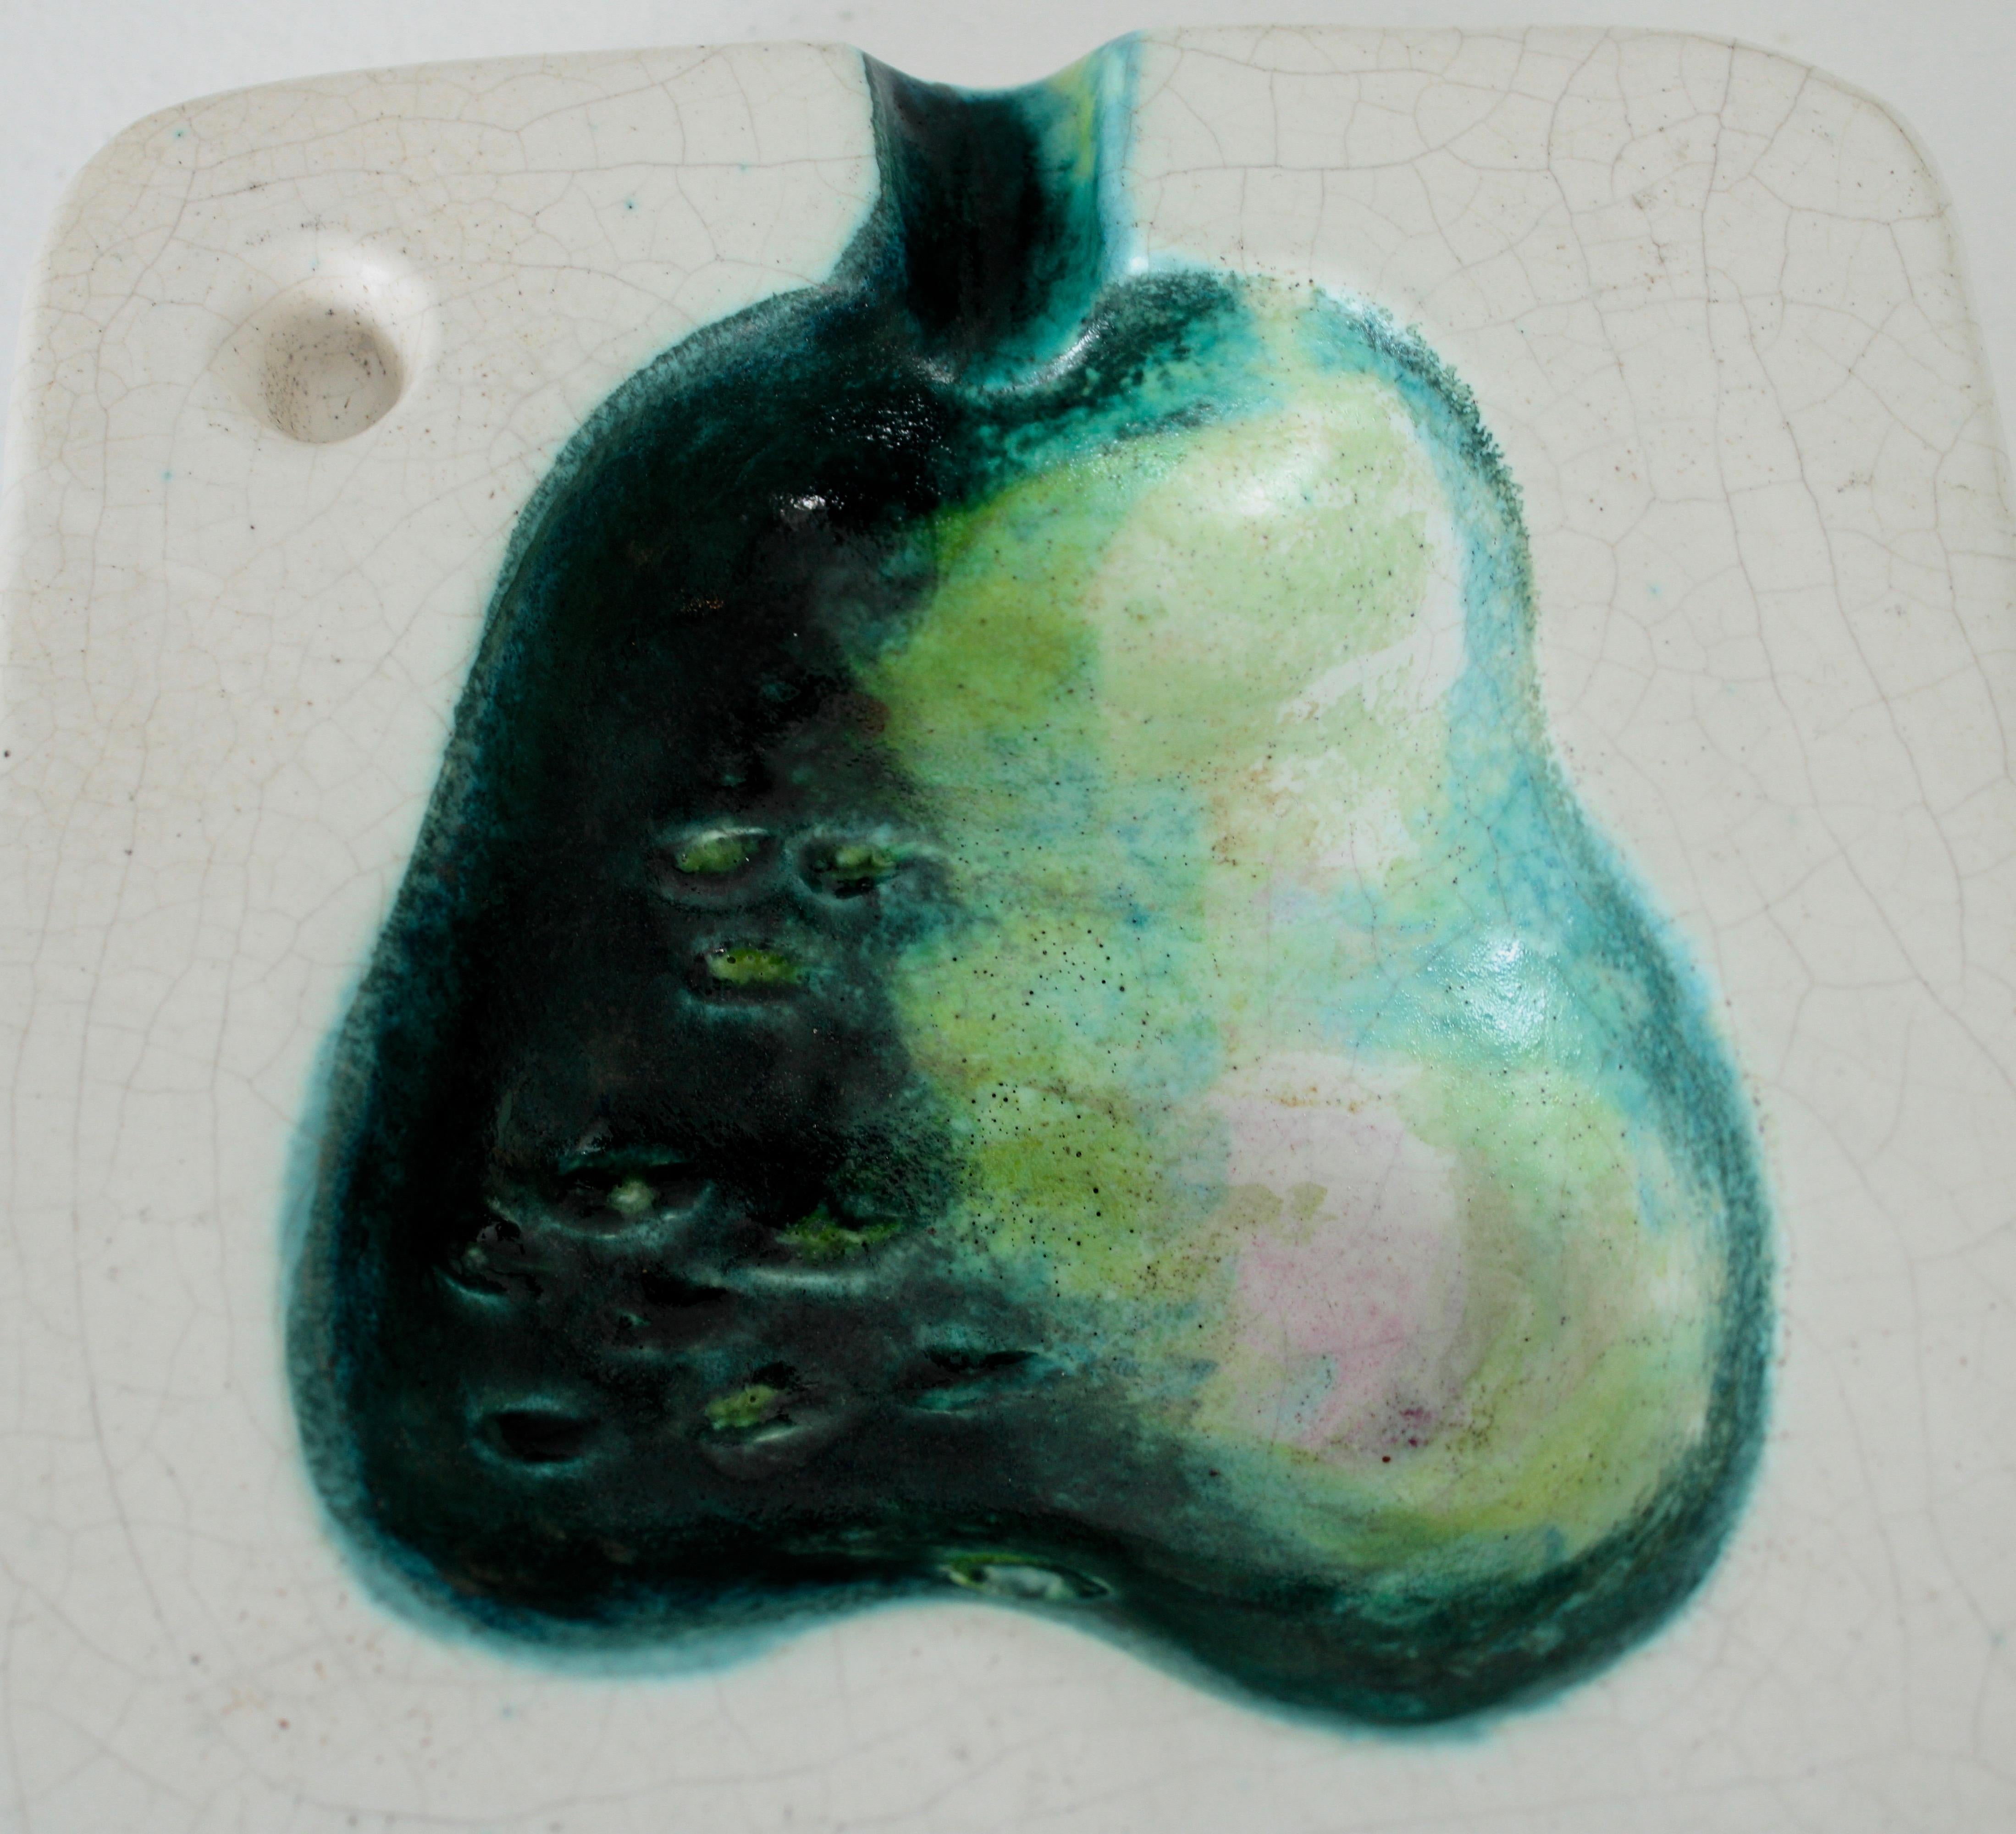 French master ceramic artist Georges Jouve ceramic cendrier ashtray or vide poche with image of a pear.
Signed Jouve and with his famous monogram.
Excellent condition, vibrant greens and beautiful complex white glaze with touch of blush coming